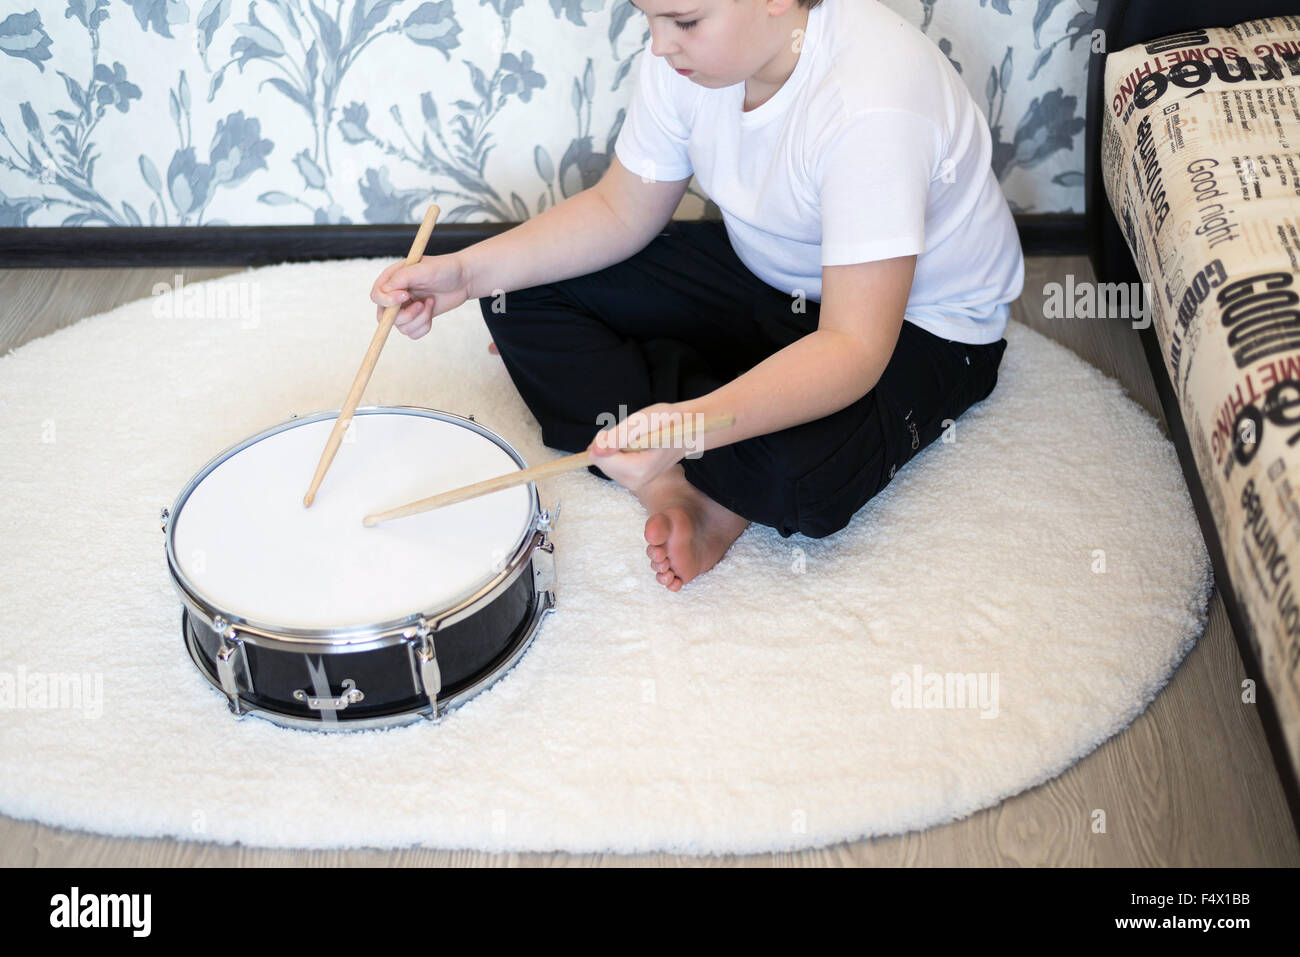 Boy teenager playing drums in  room Stock Photo